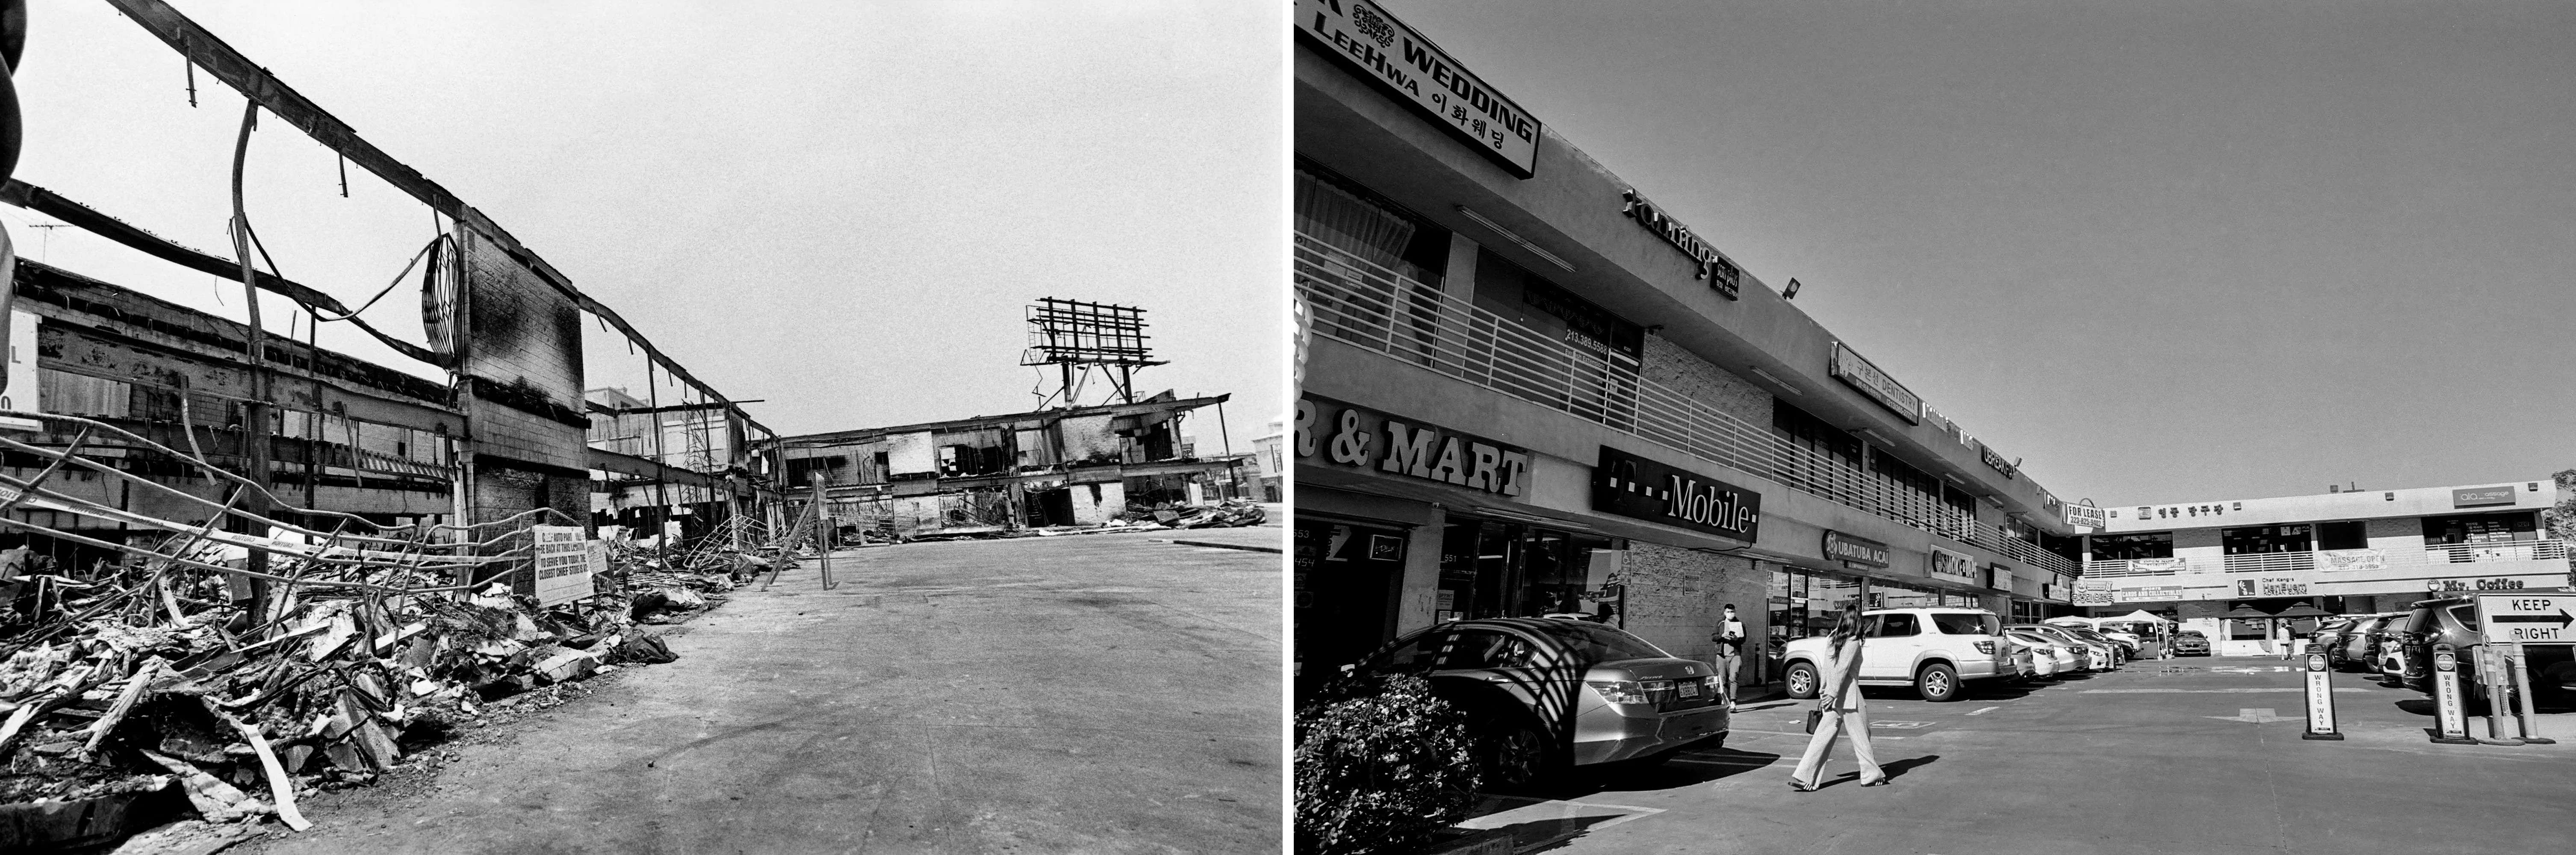 Two pictures are shown side by side: On the left, a shopping center has been destroyed; on the right, it